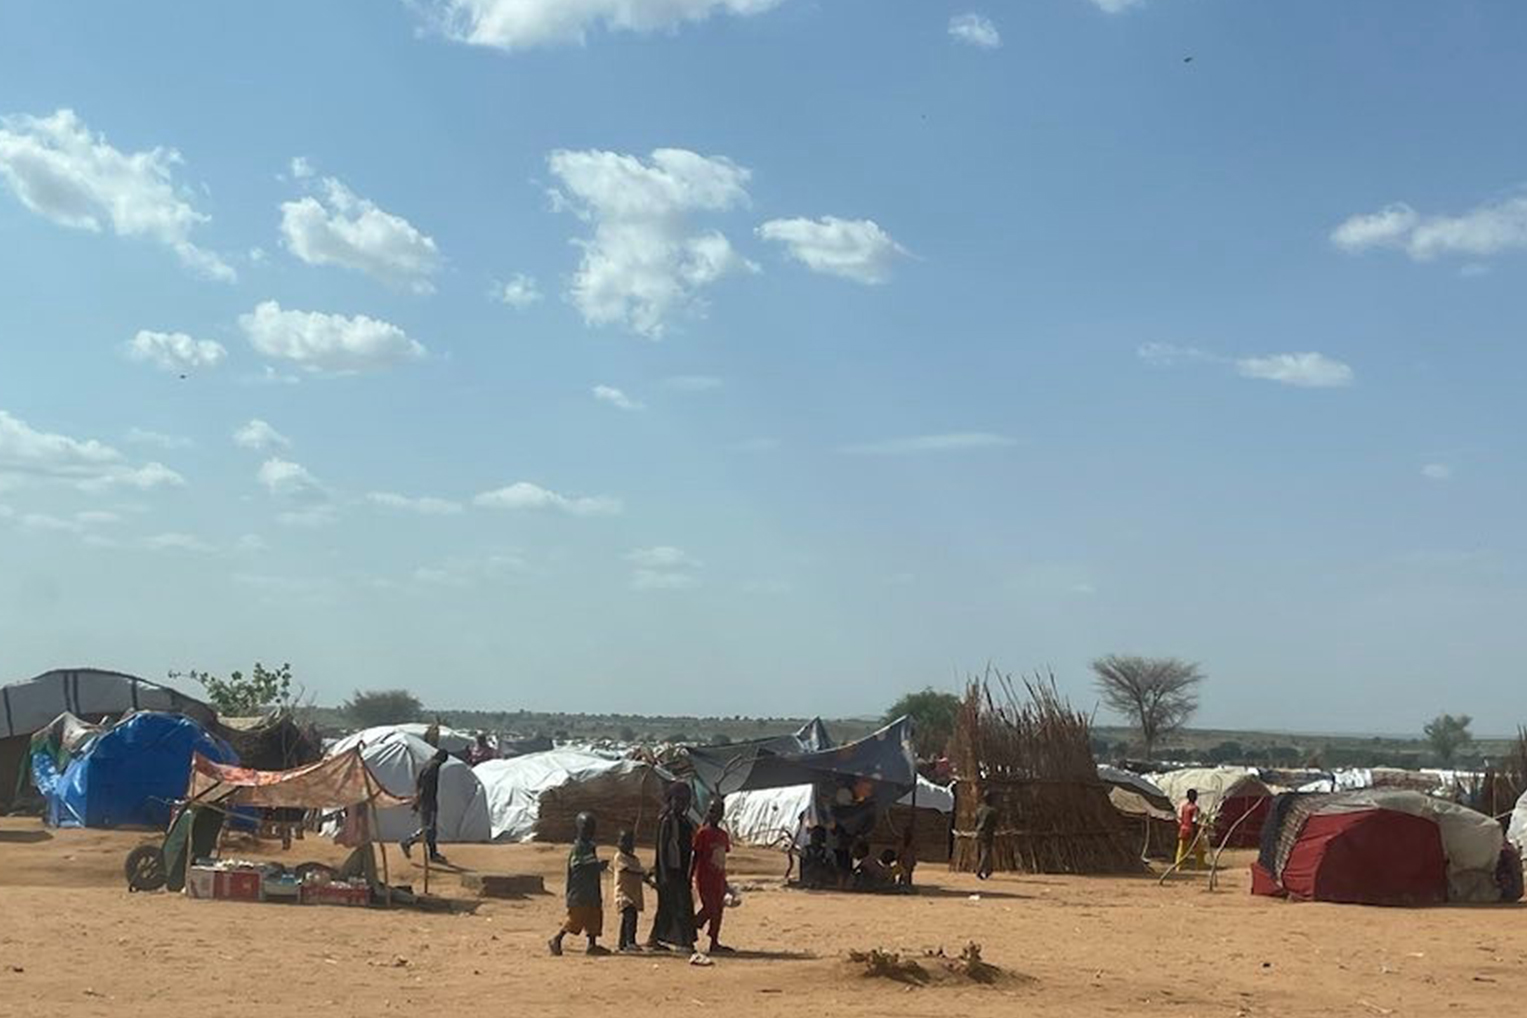 Sudanese refugees in Chad